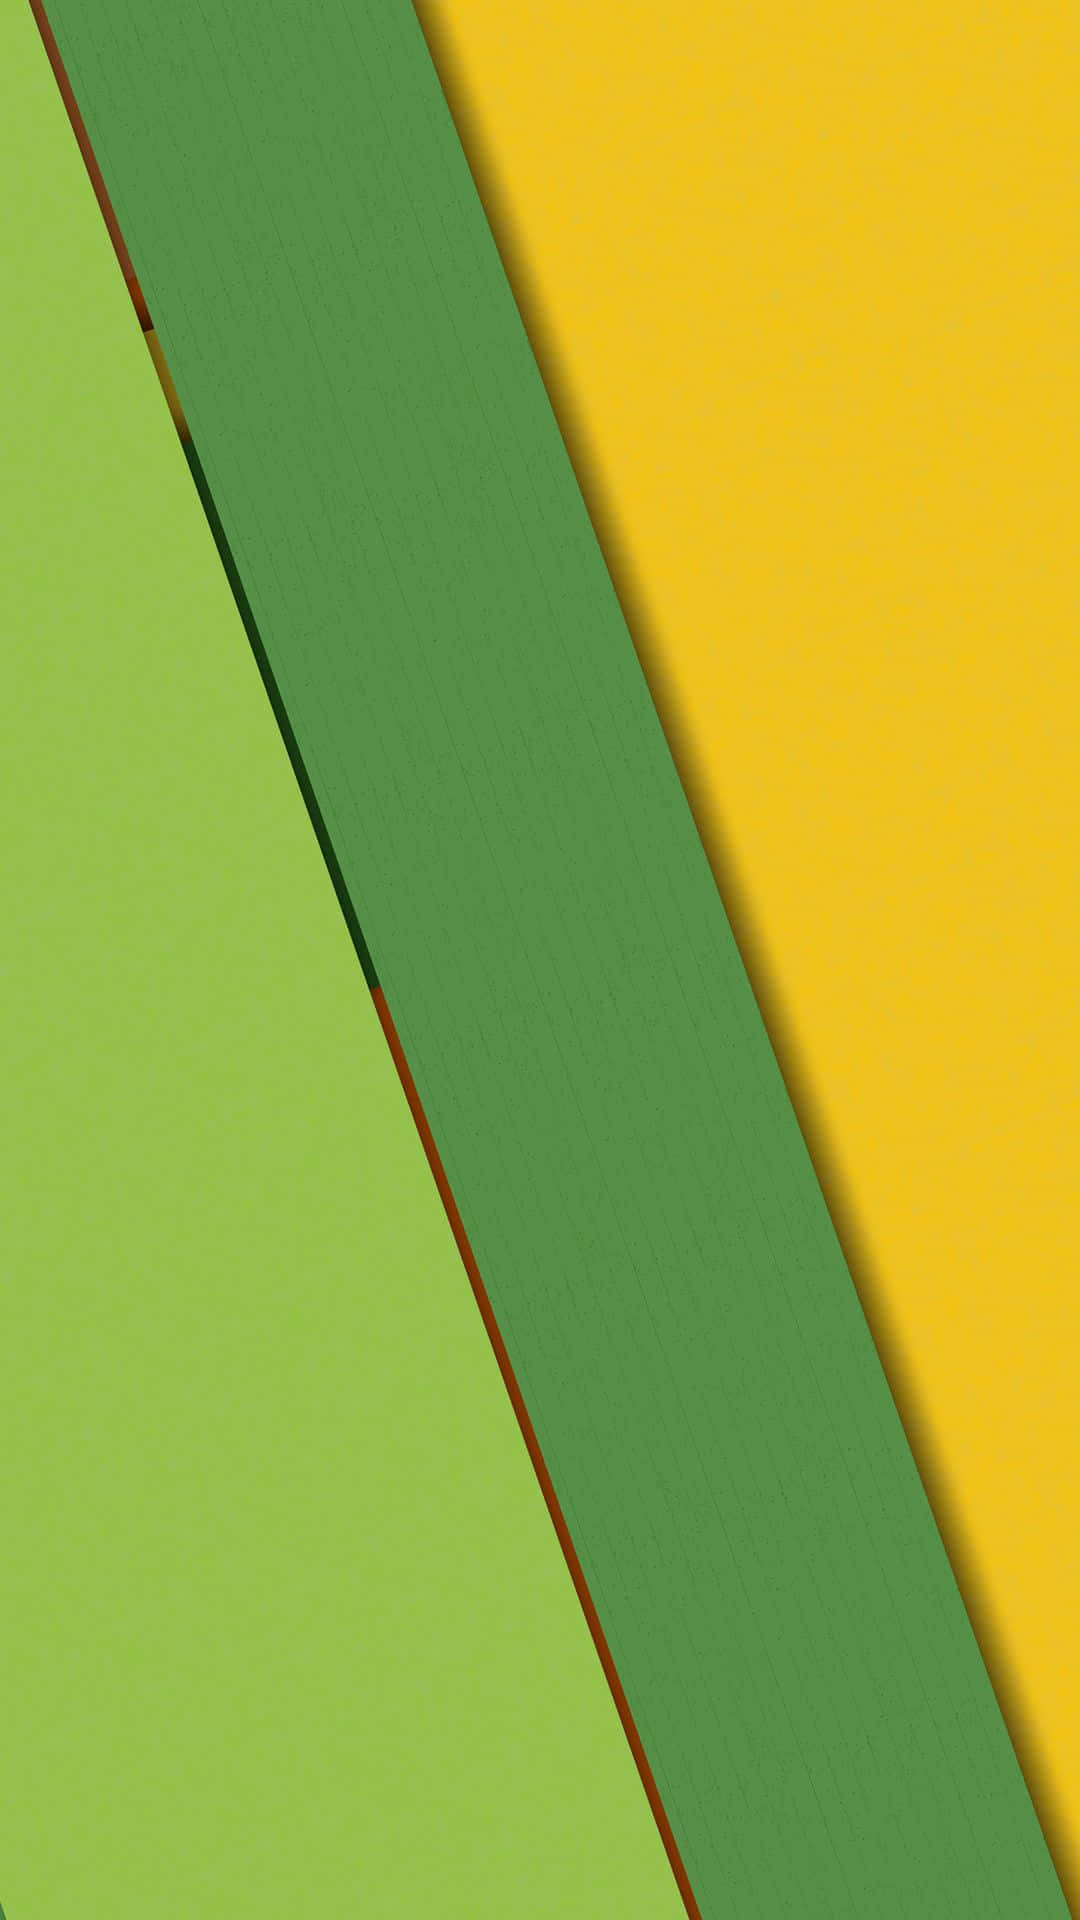 Yellow And Green Google Material